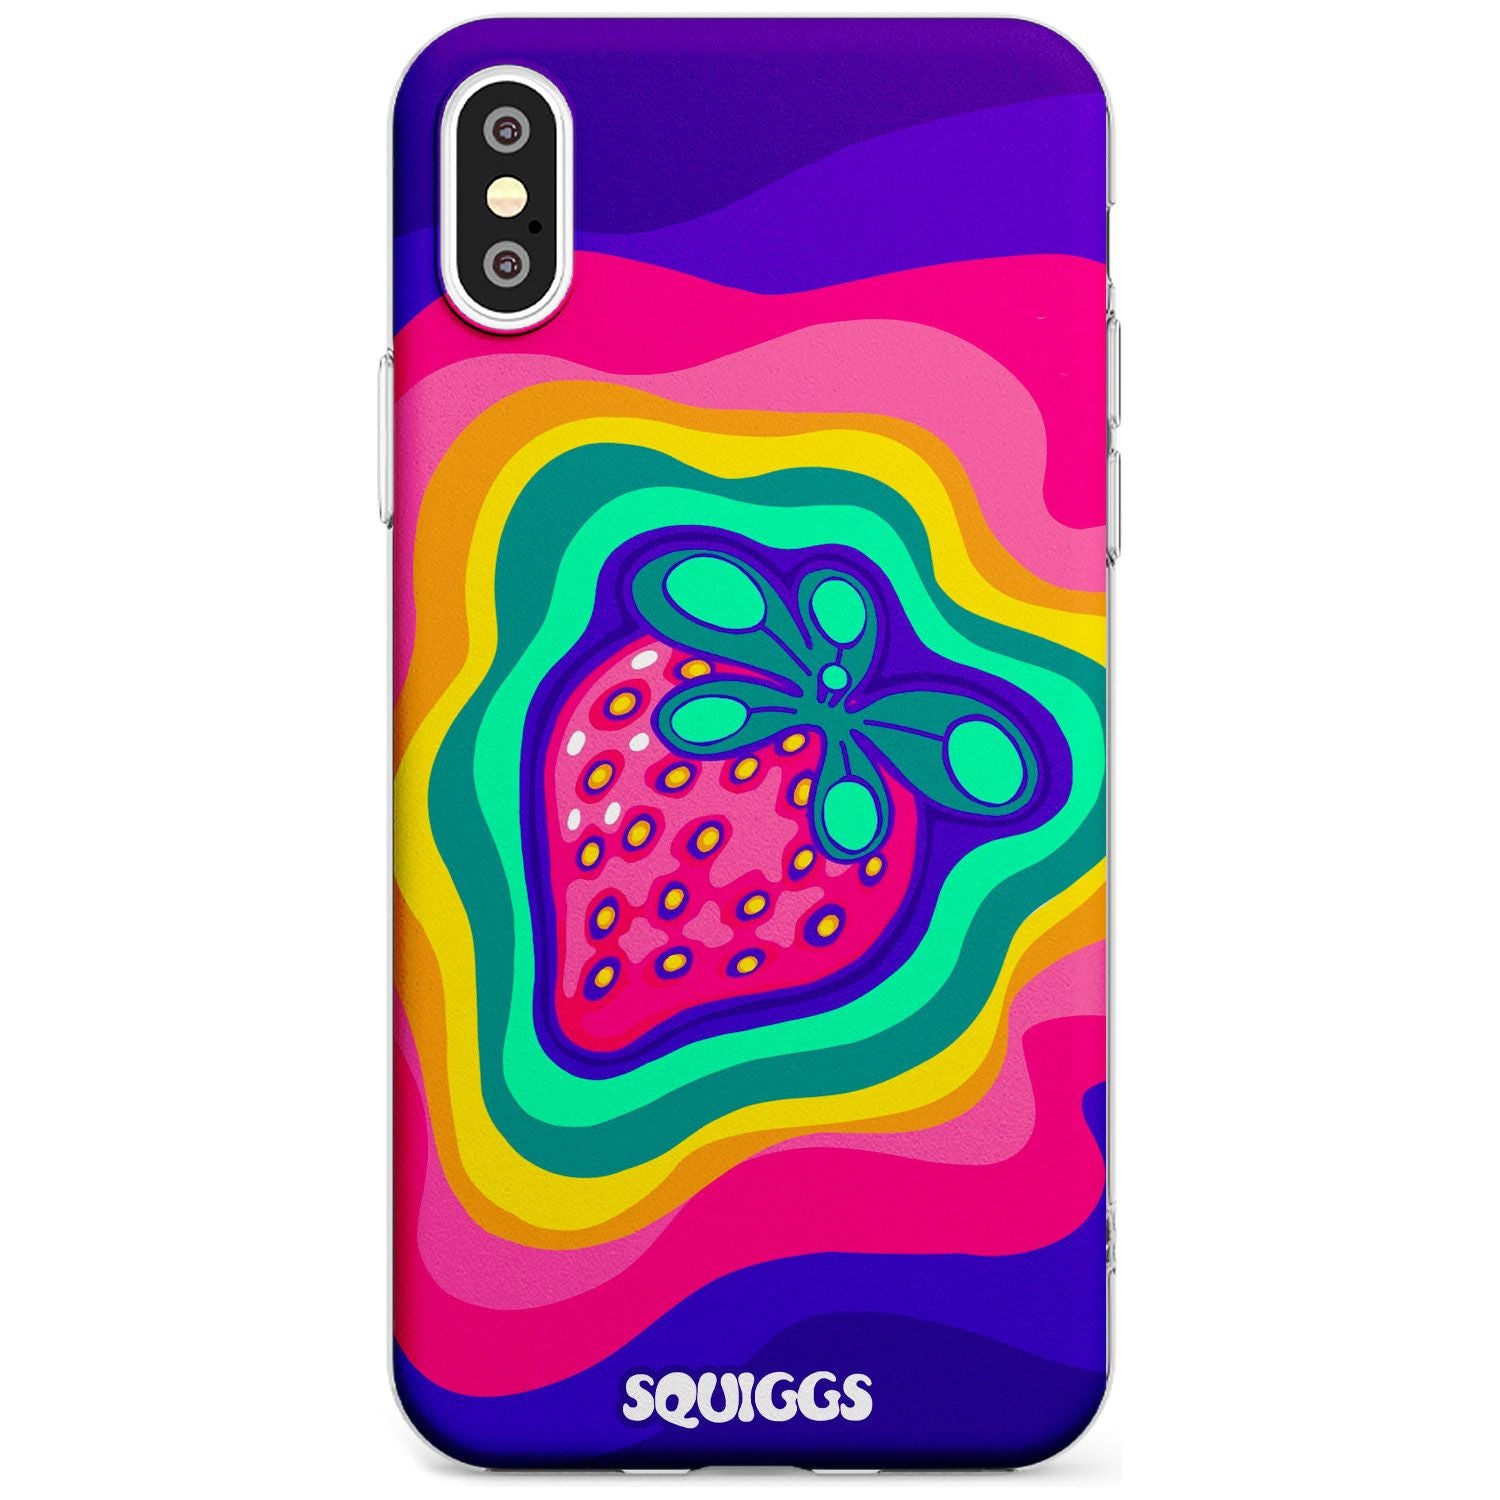 Strawberry Rainbow Black Impact Phone Case for iPhone X XS Max XR